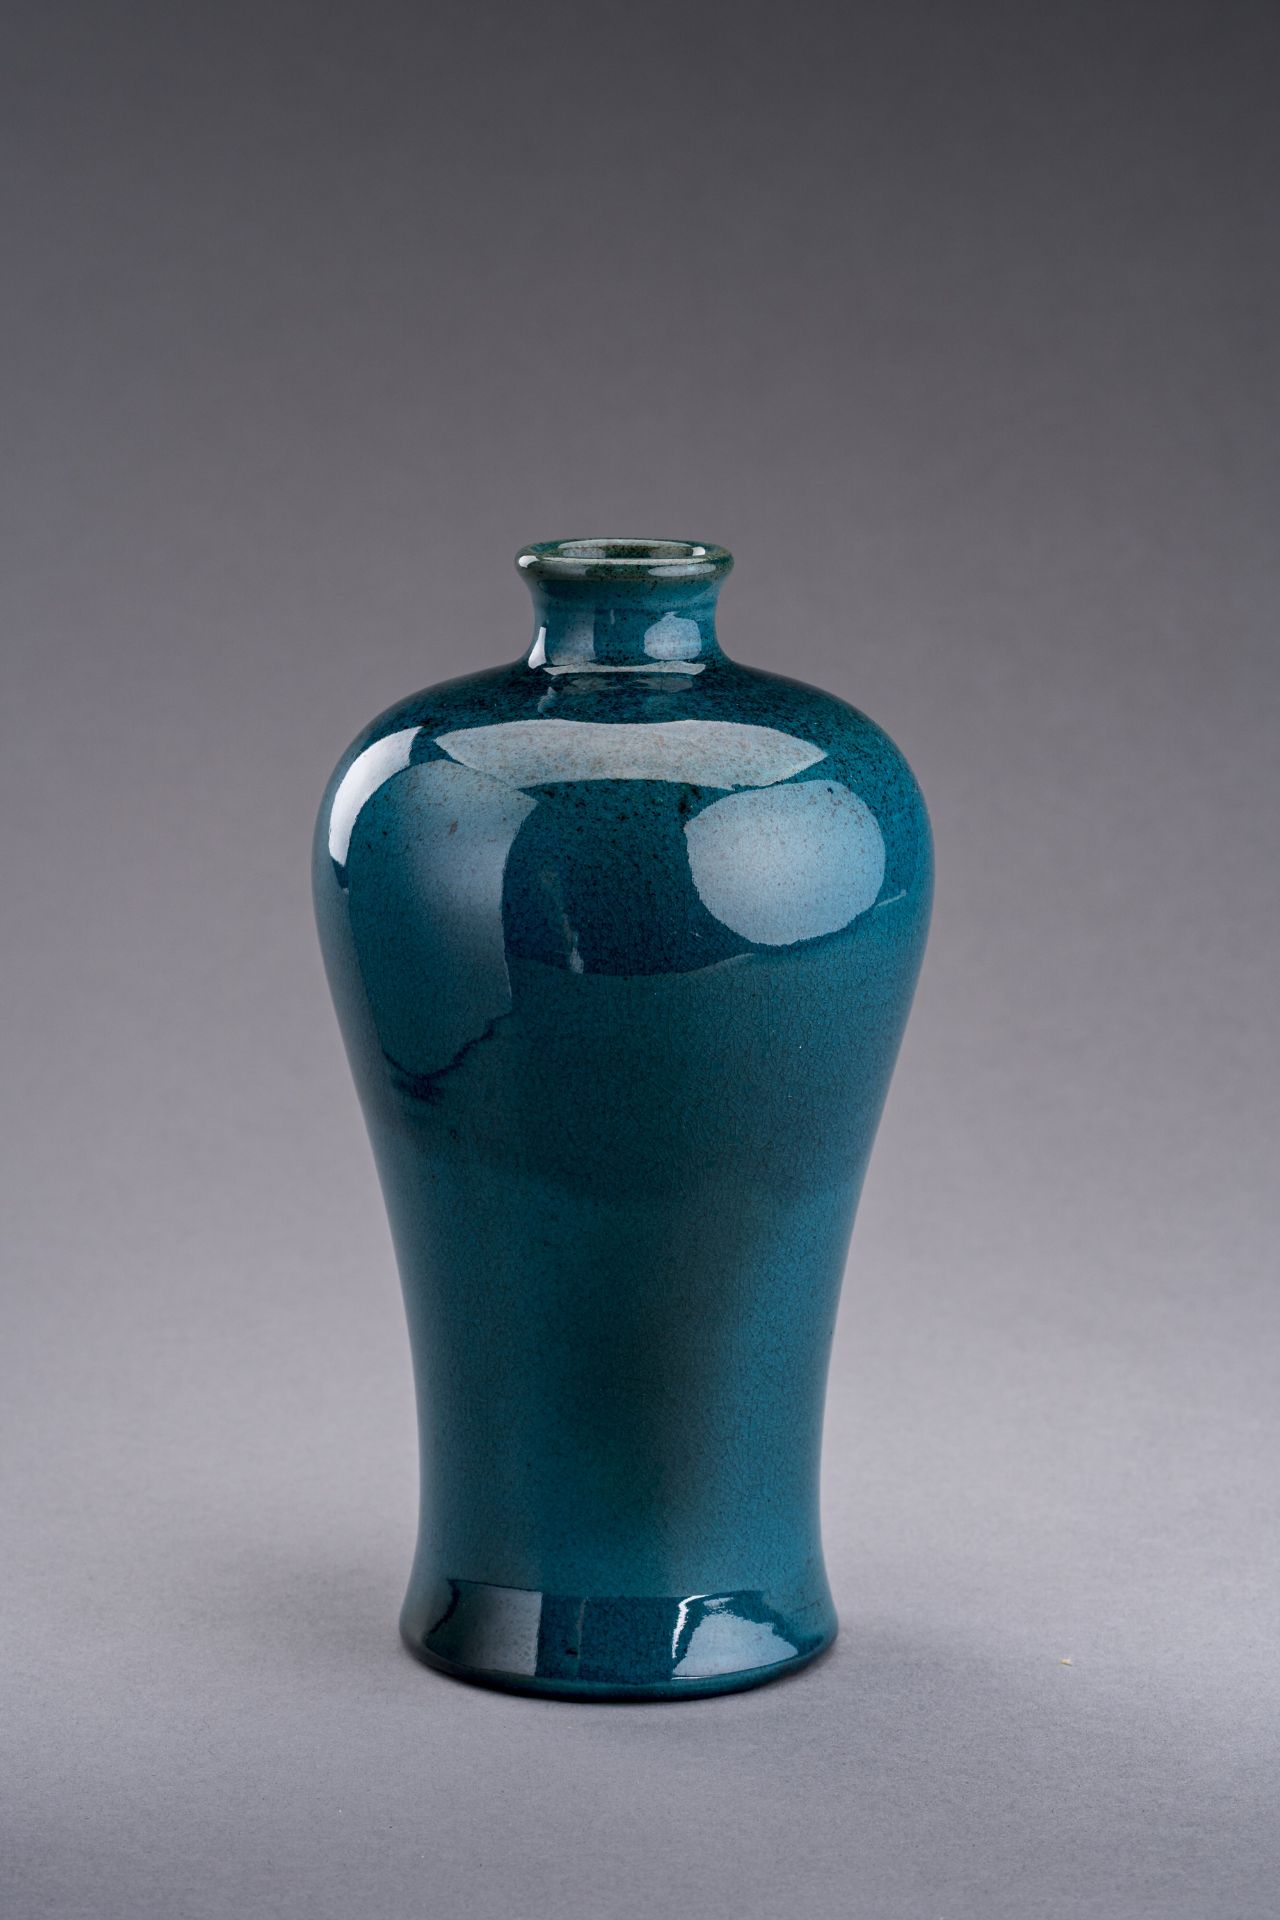 A TURQUOISE CRACKLE-GLAZED PORCELAIN VASE, MEIPING, c. 1920s - Image 2 of 6